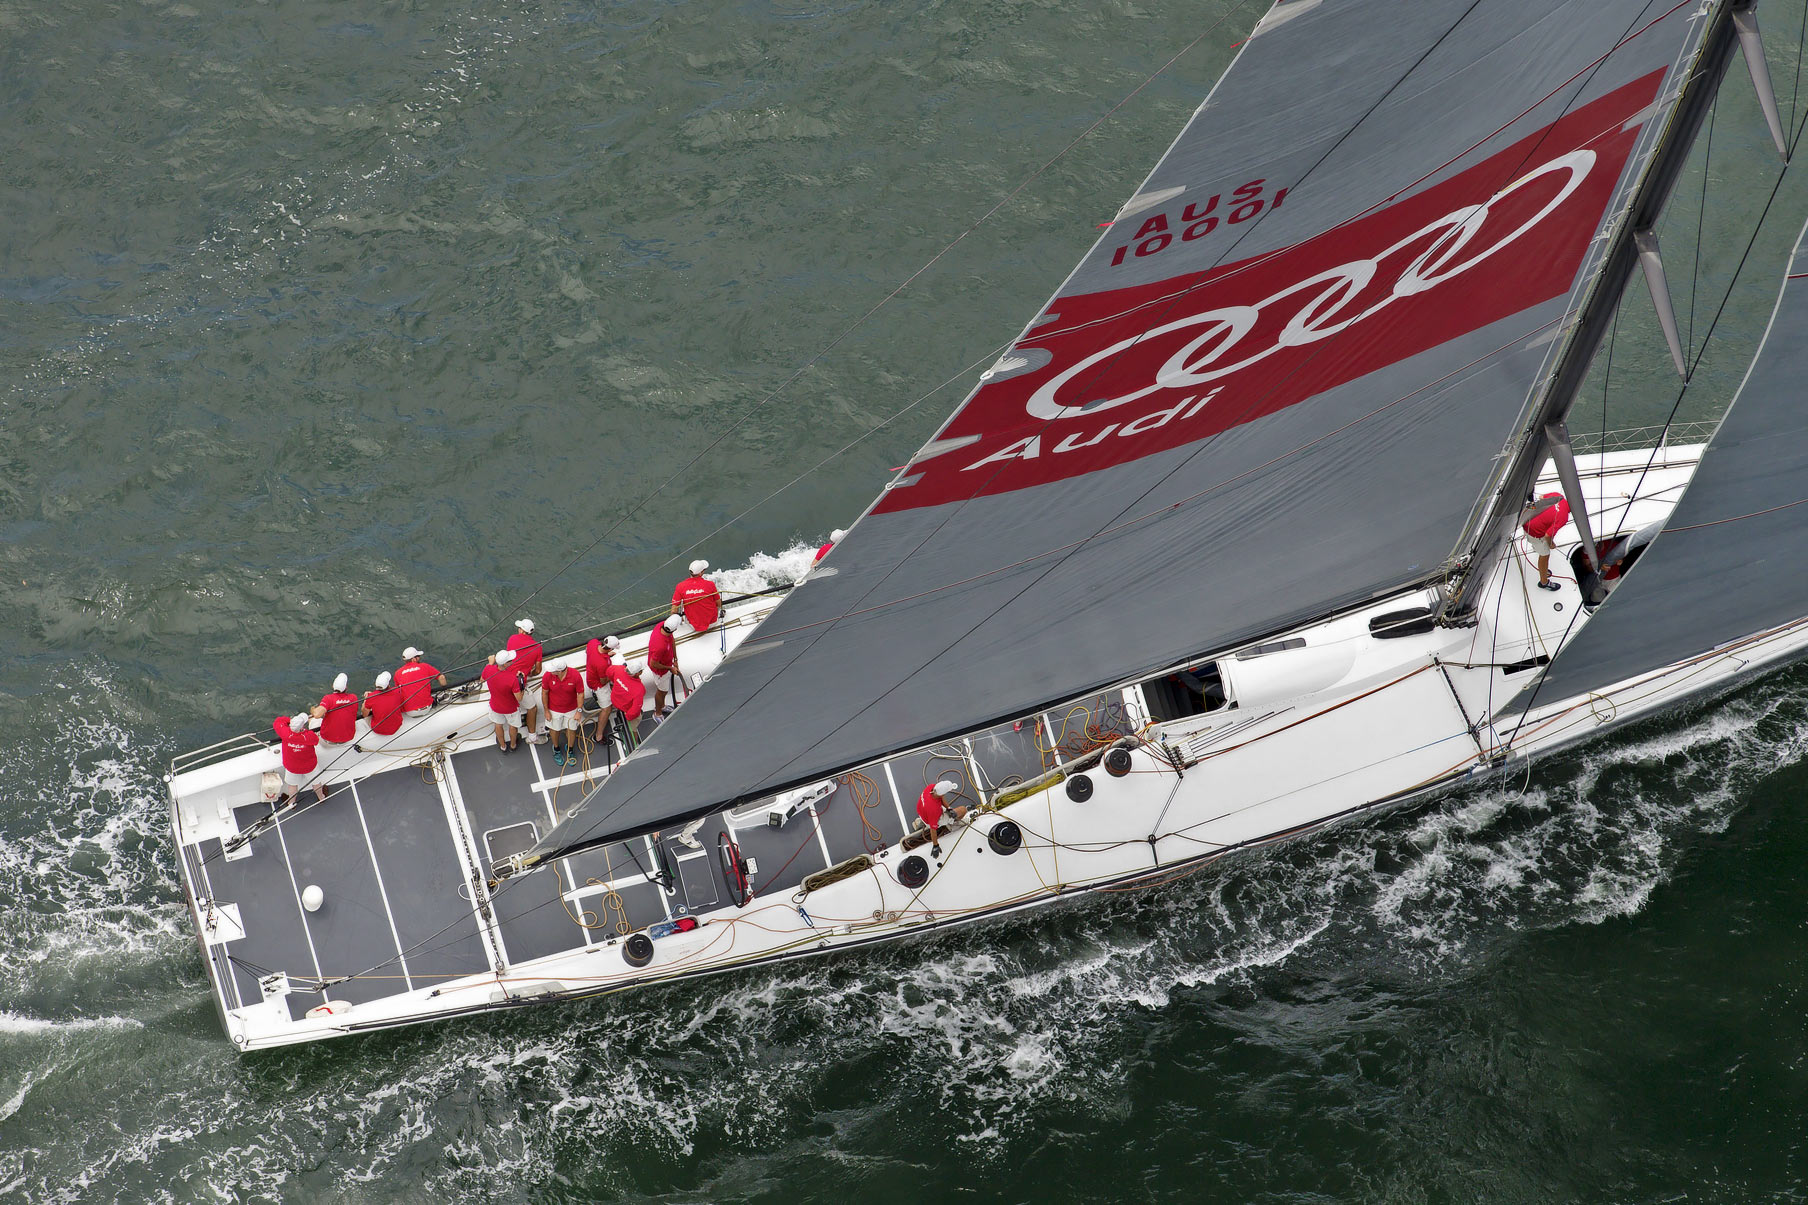 Wild Oats XI crosses the line in the 2017 Land Rover Sydney Gold Coast Yacht Race.